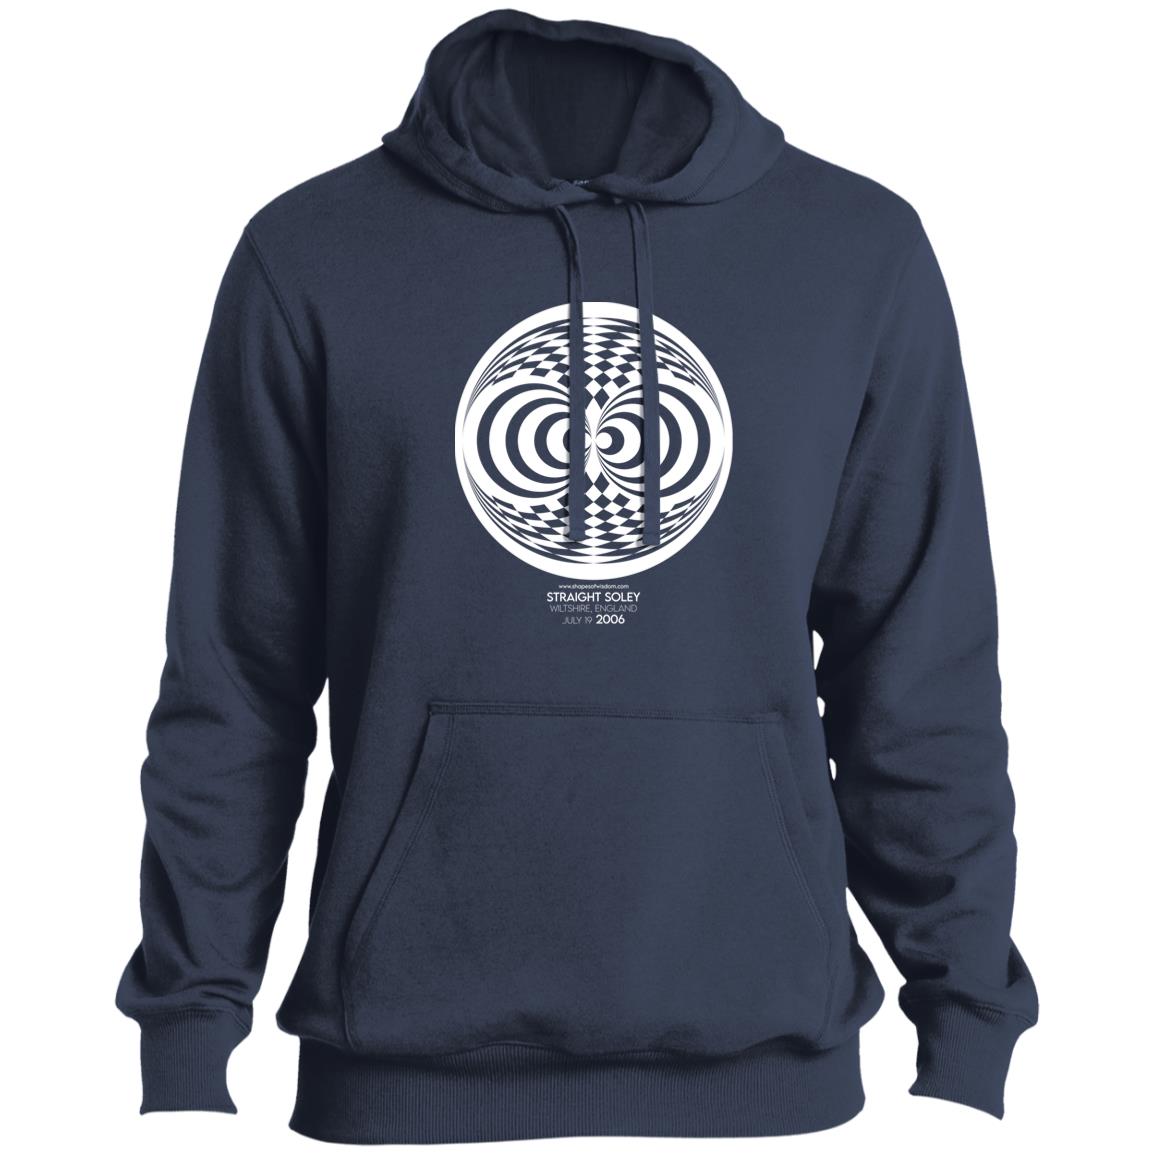 Crop Circle Pullover Hoodie - Straight Soley